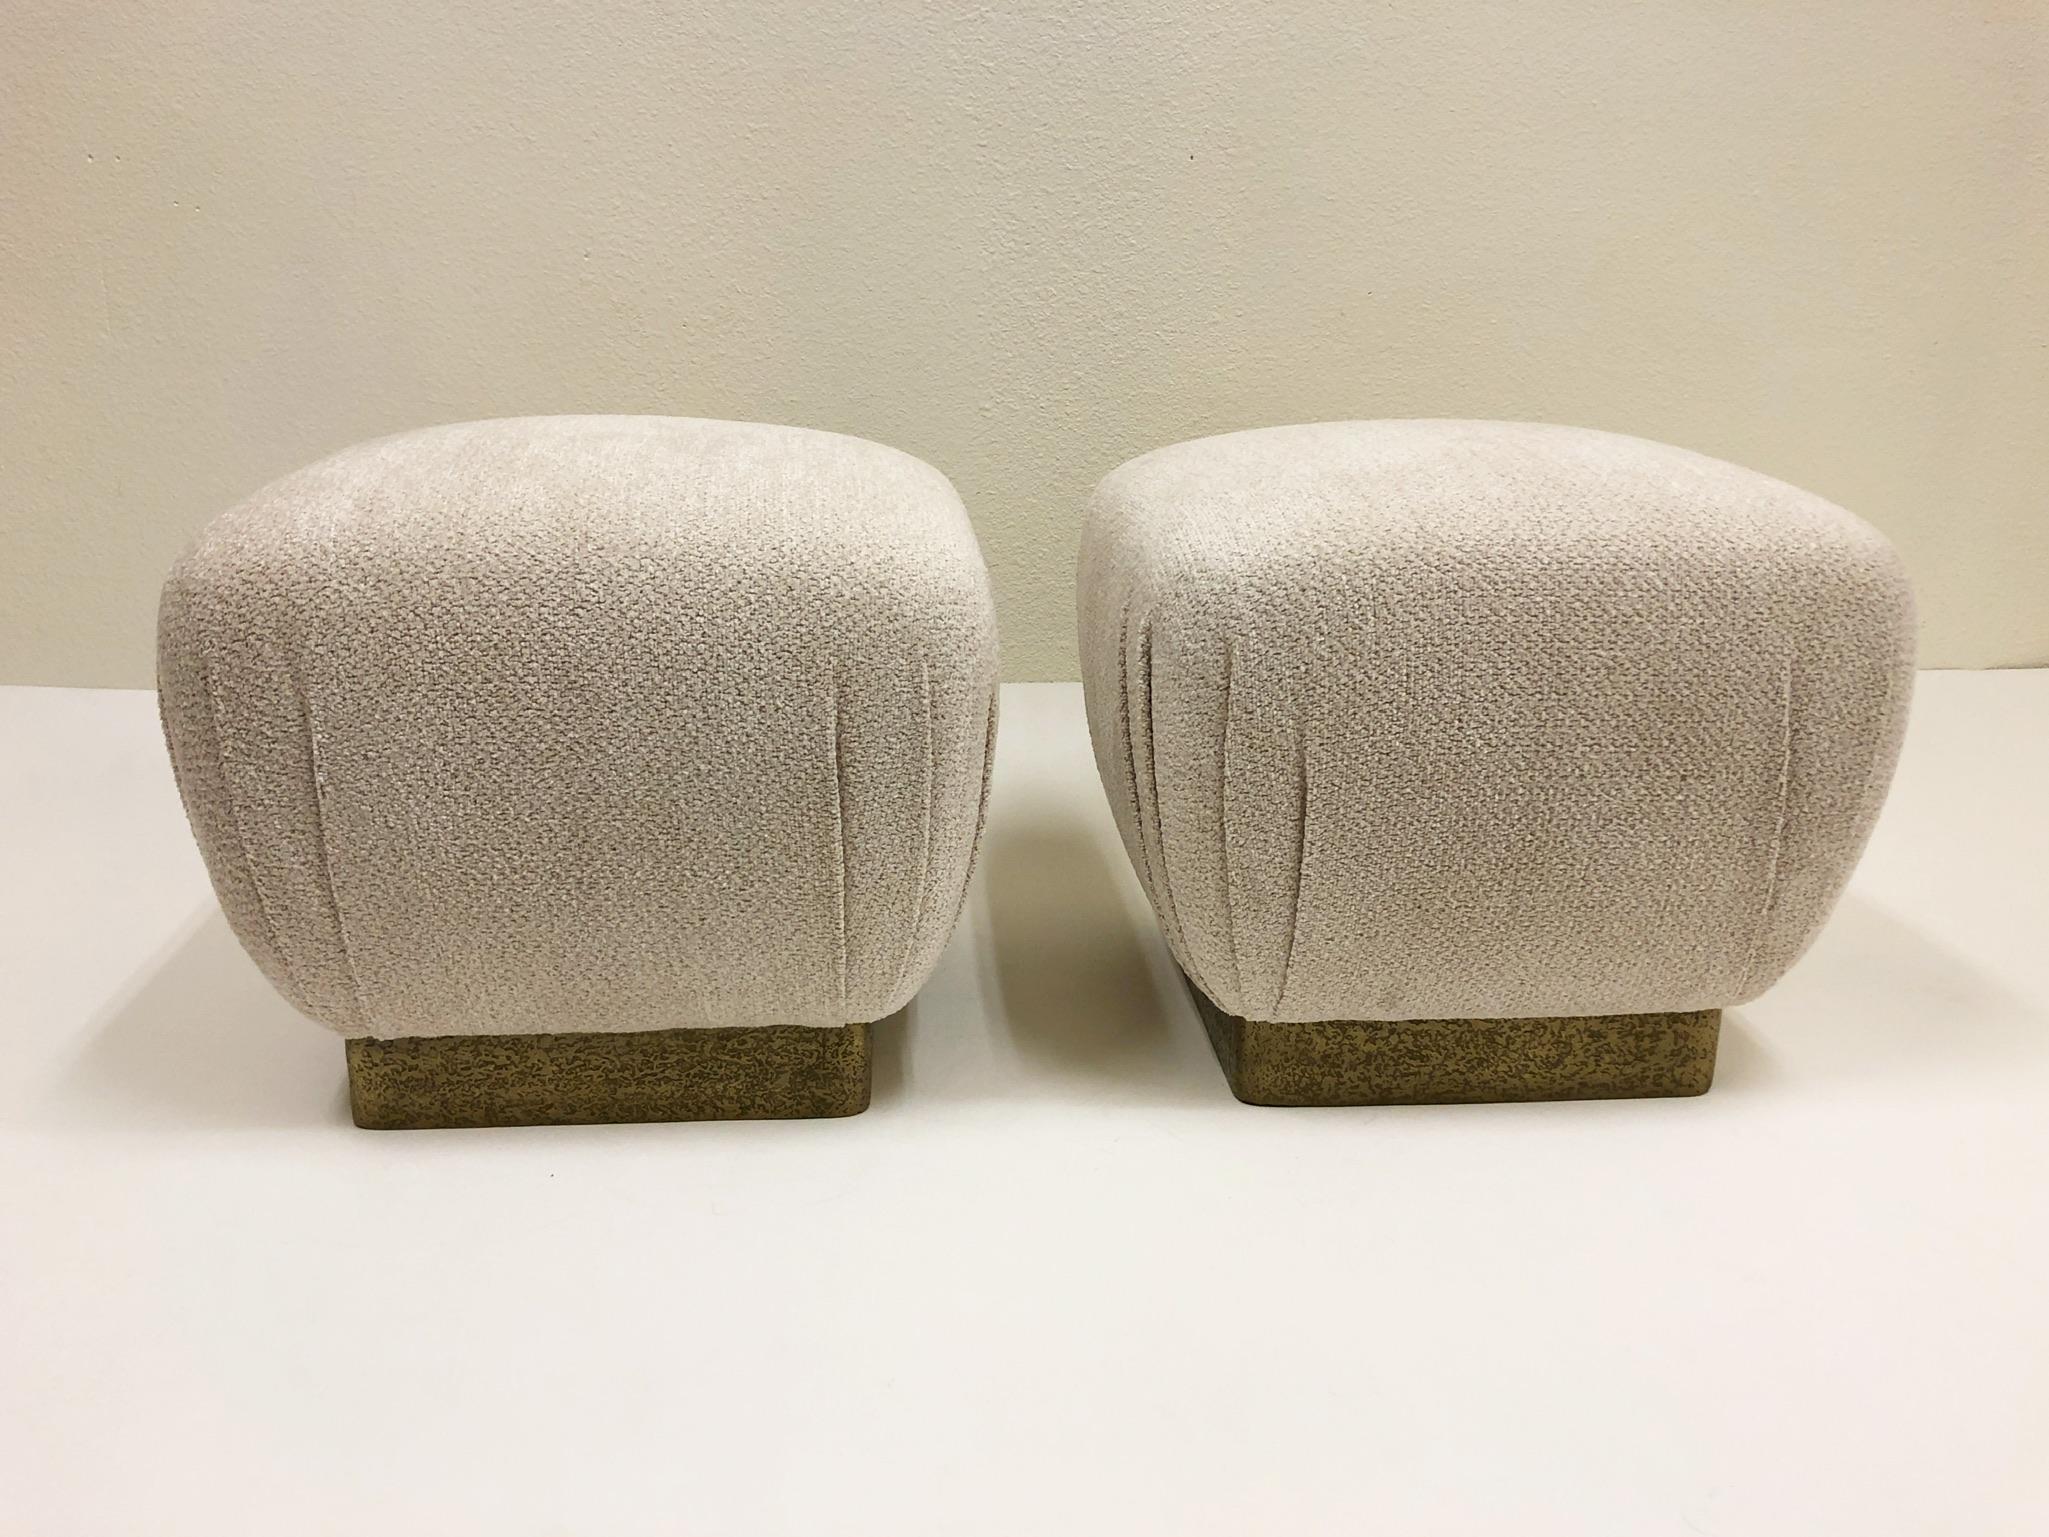 A beautiful pair of Poufs design by Marge Carson in the 1970s. The poufs are covered in a beautiful off white Chanel fabric and the bases have a custom Brutalist brass finish (see detail photos).

Dimensions: 17.5” high, 20” wide, 20” deep.